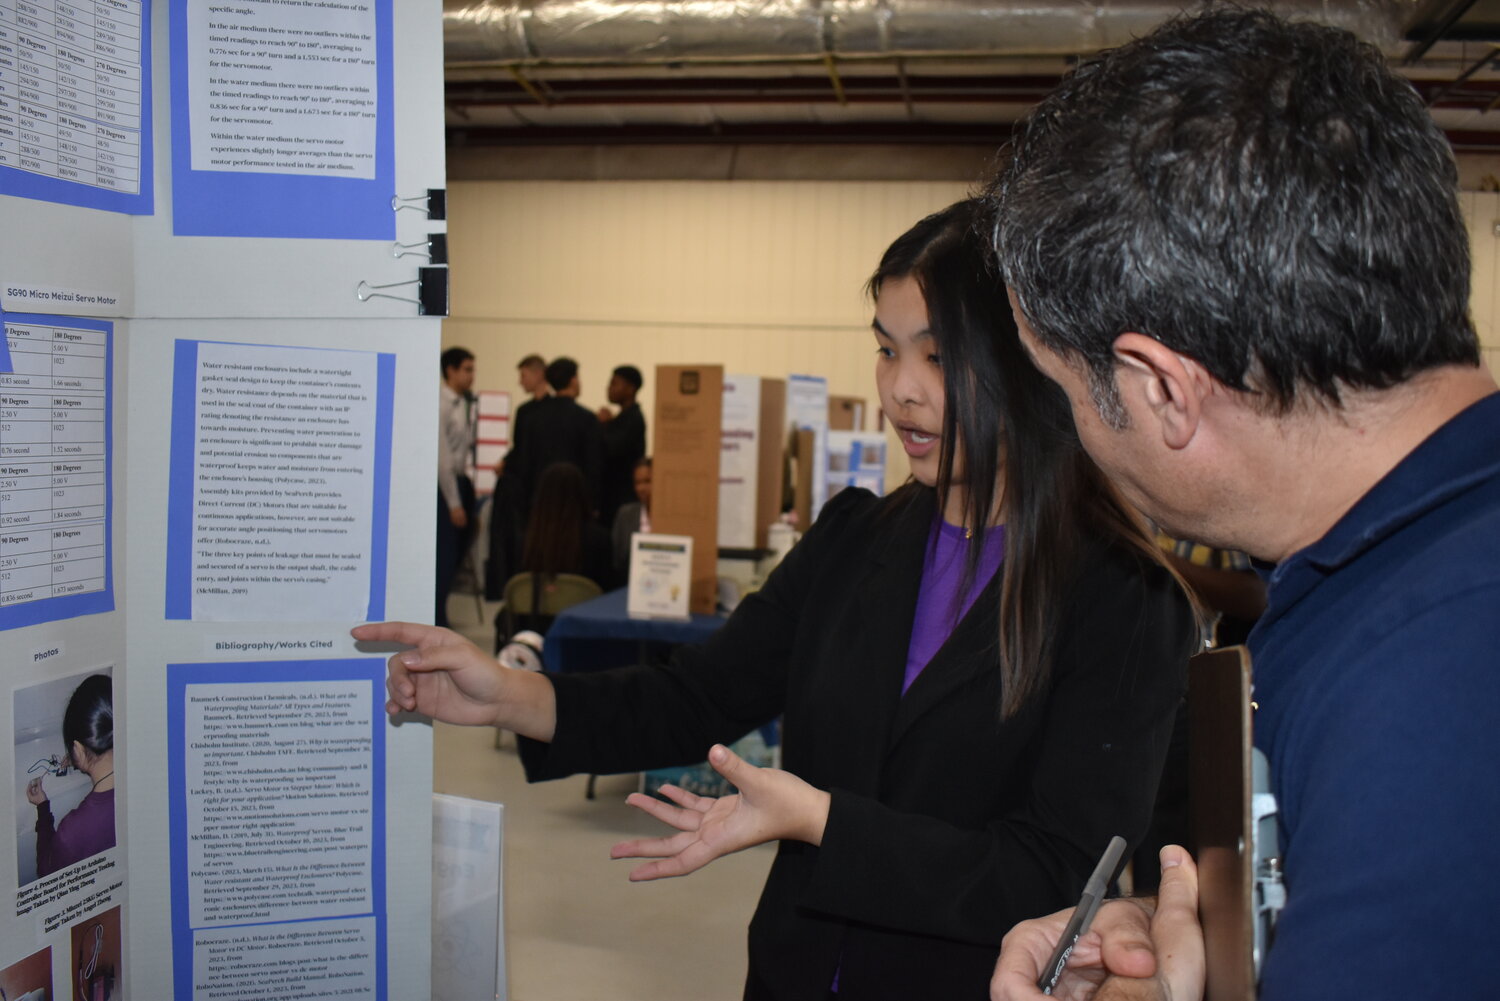 Judge and engineer Ray Morin listened to Angel Zheng explain the hypothesis, examination, and conclusion of her project on the waterproofing and experimentation of servo motors.